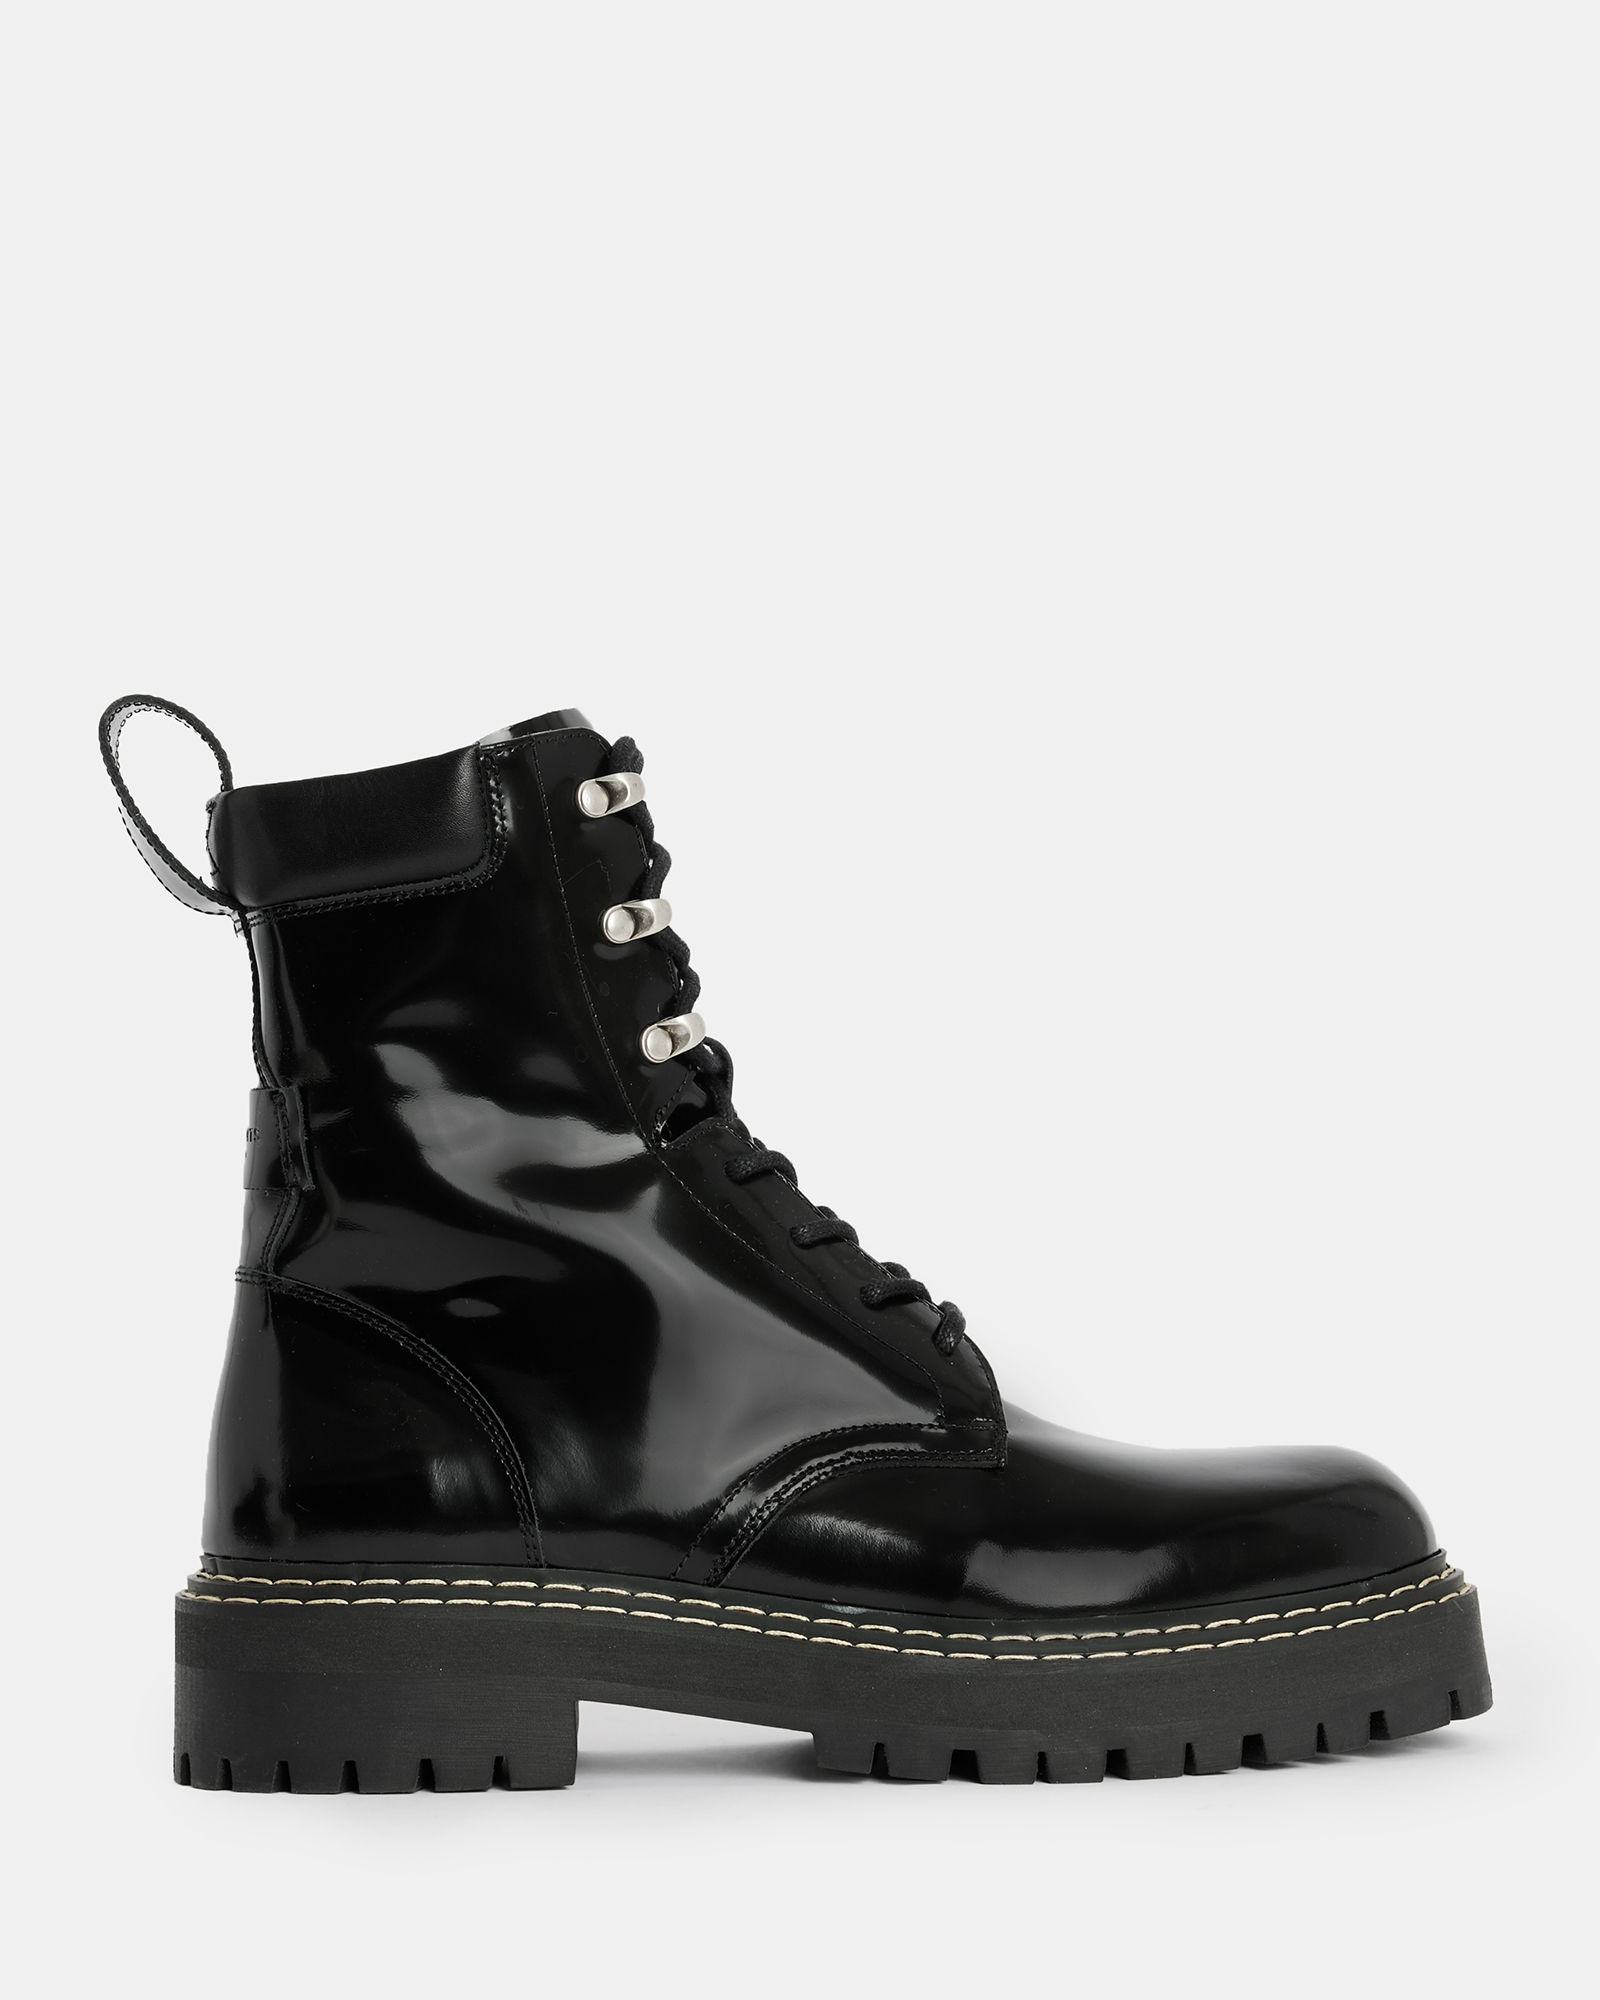 AllSaints Heidi Shiny Leather Lace Up Boots